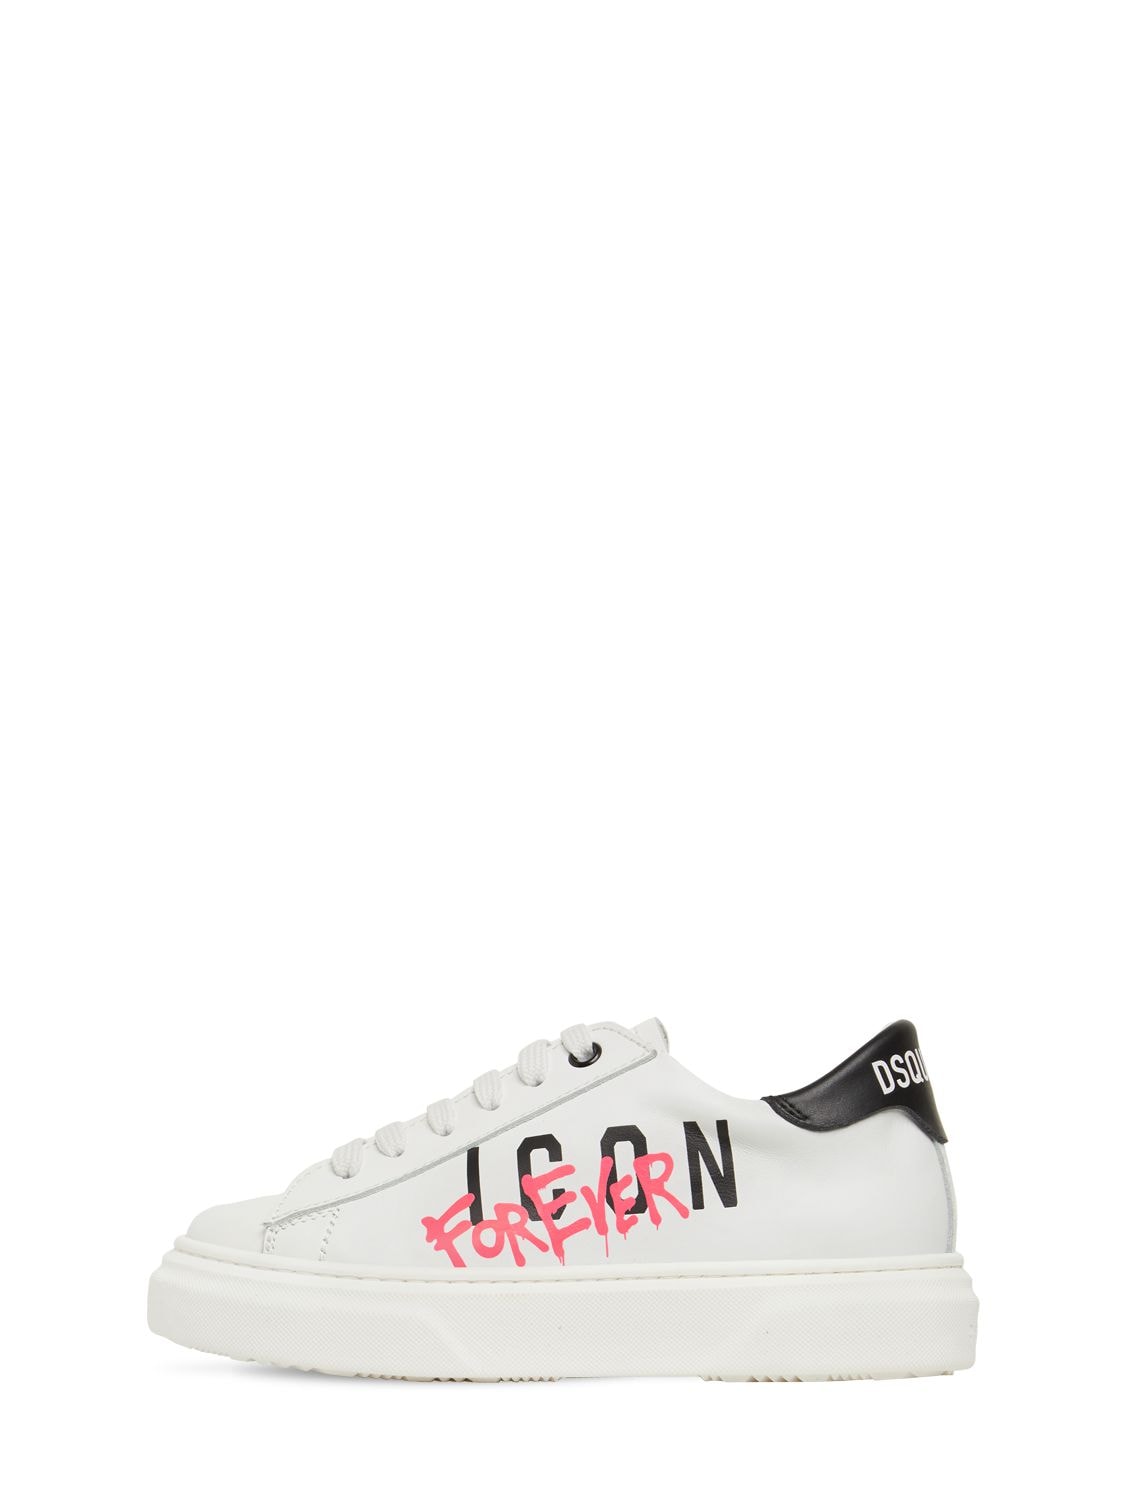 DSQUARED2 ICON FOREVER LACE-UP LEATHER SNEAKERS